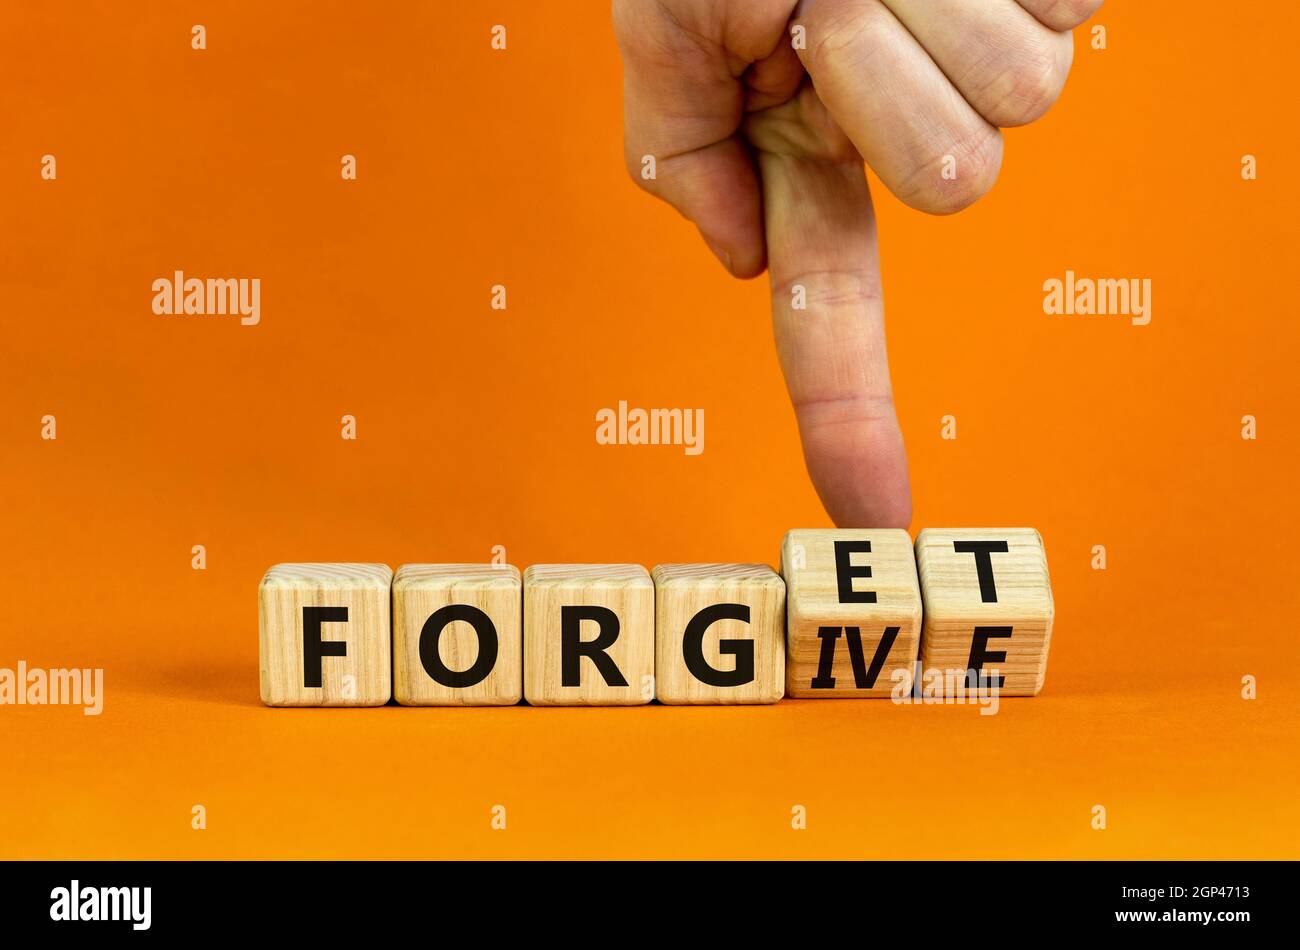 Forgive and forget symbol. Businessman turns wooden cubes and changes the word 'forgive' to 'forget'. Beautiful orange background, copy space. Busines Stock Photo